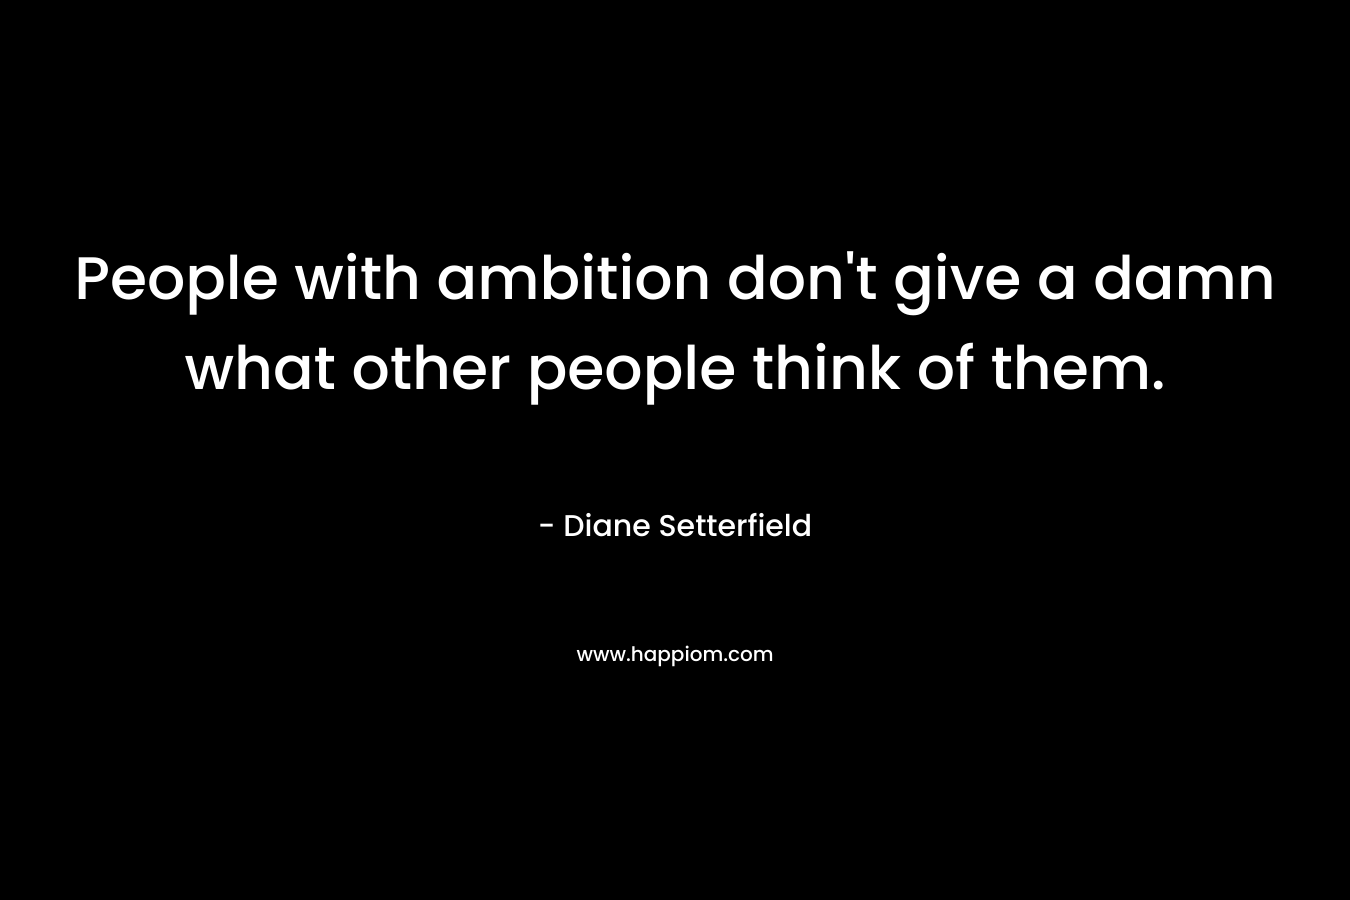 People with ambition don’t give a damn what other people think of them. – Diane Setterfield